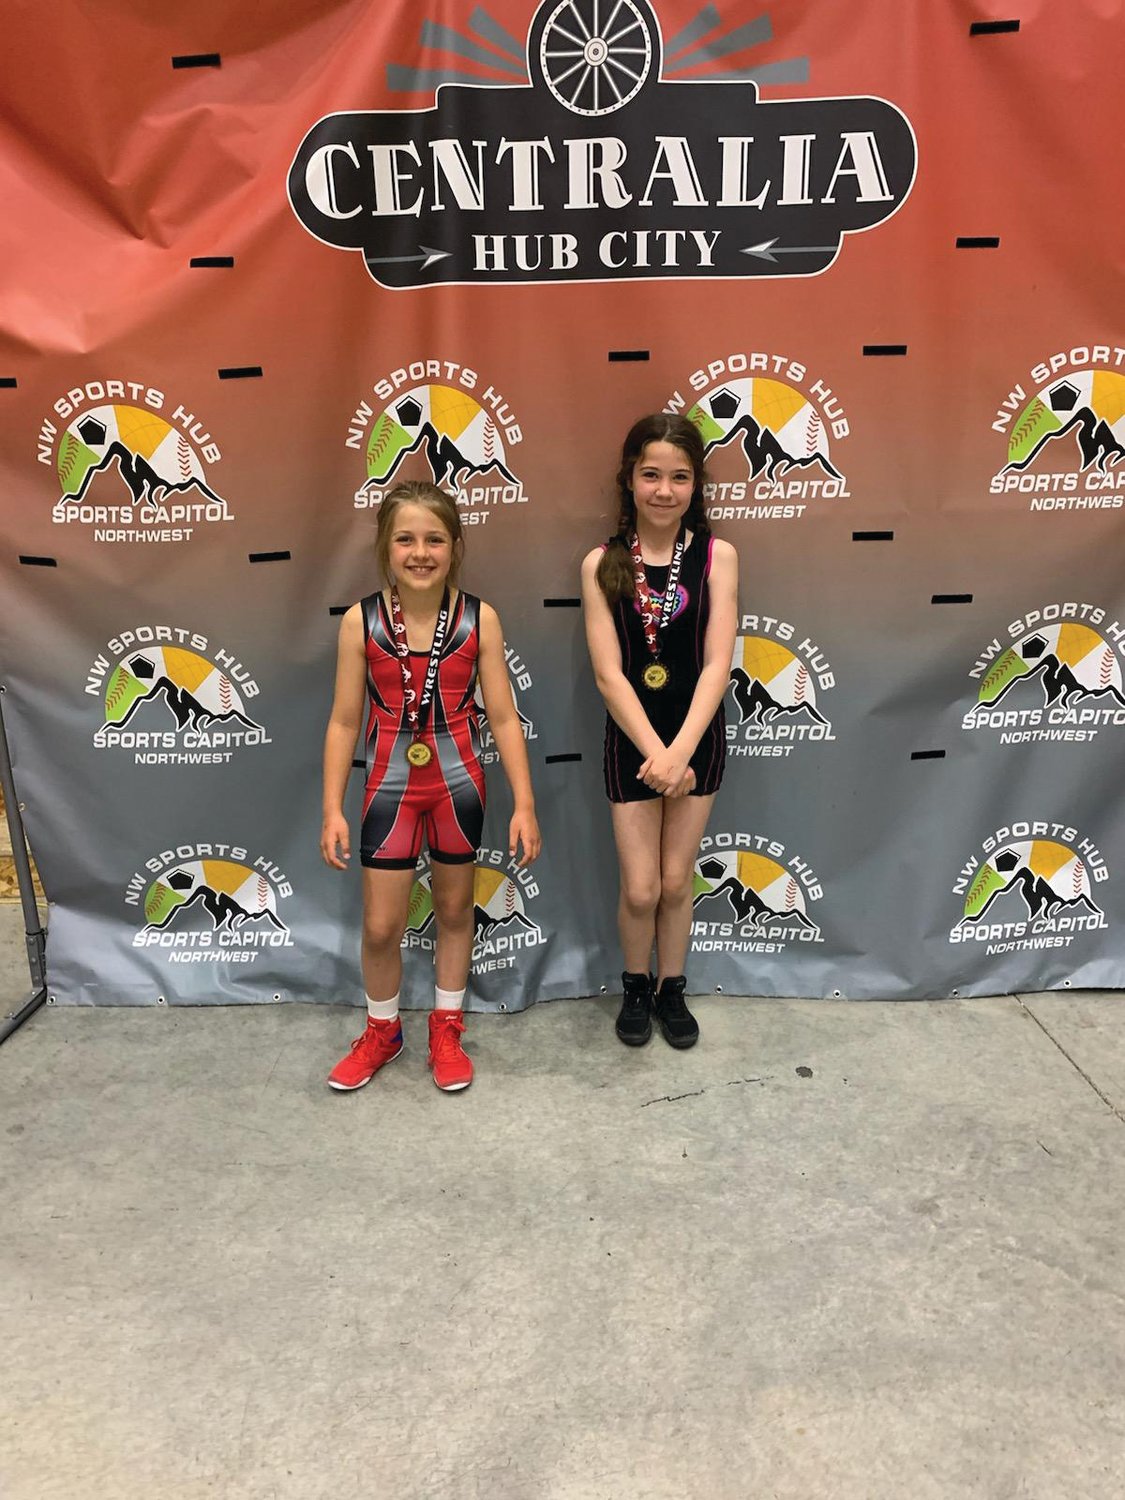 Savannah Grimm, 11, and sister Layla Grimm, 9, pose for a photo after winning medals at the Washington State Wrestling Association’s Super State Championship.